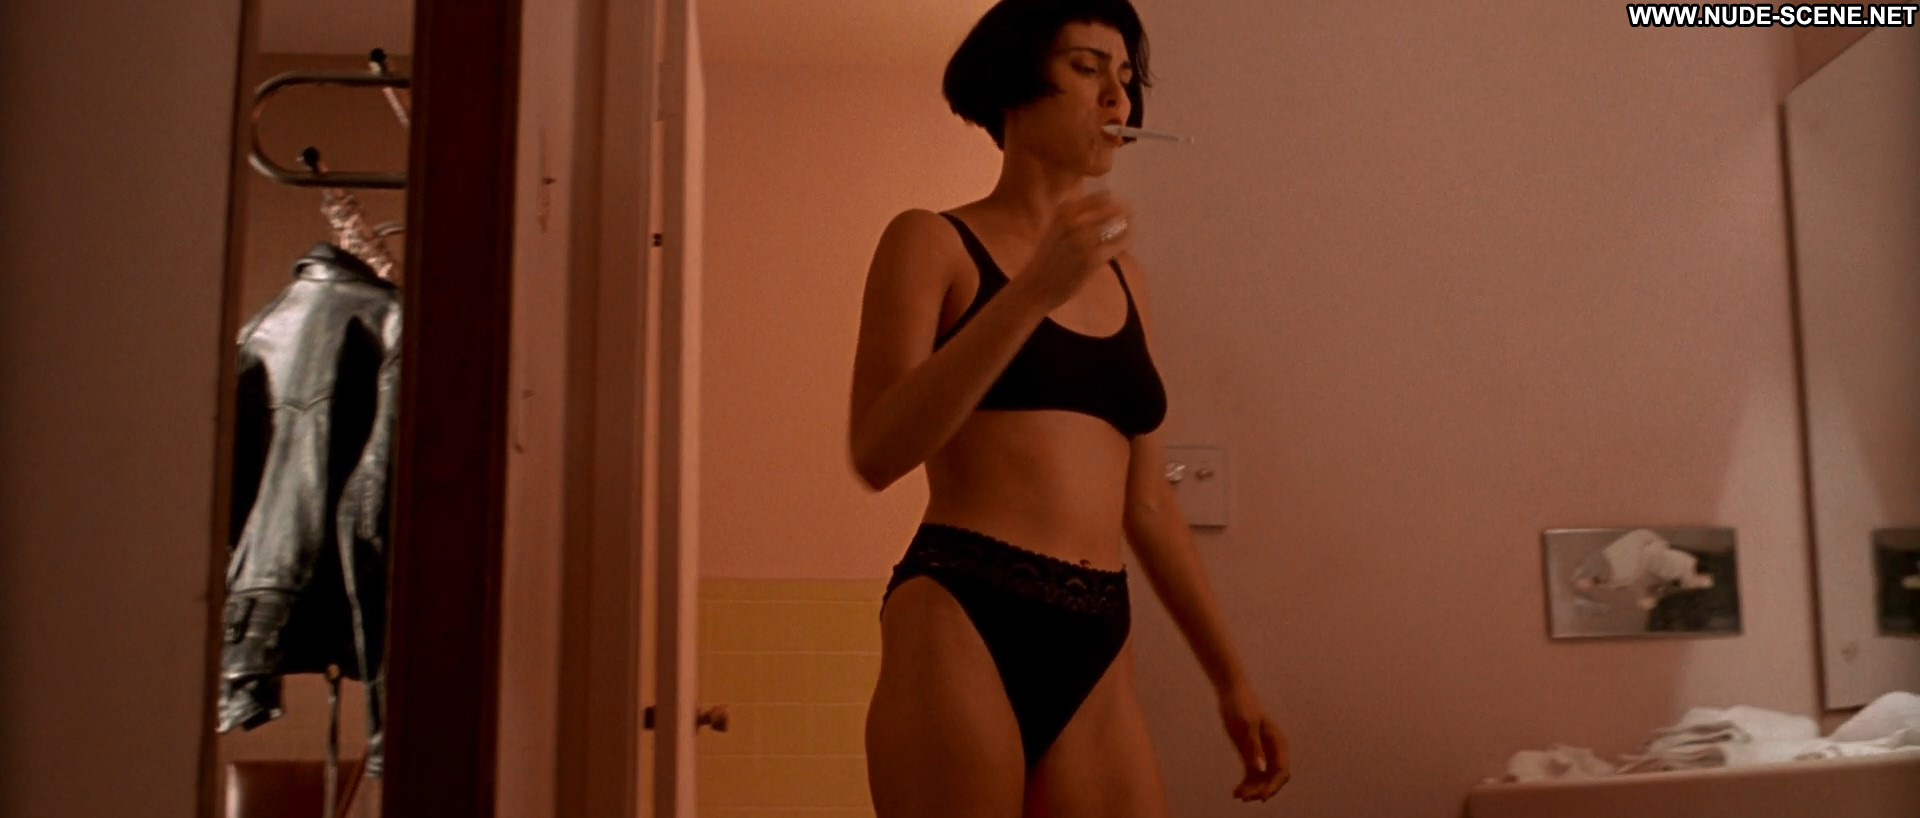 Michelle forbes sex